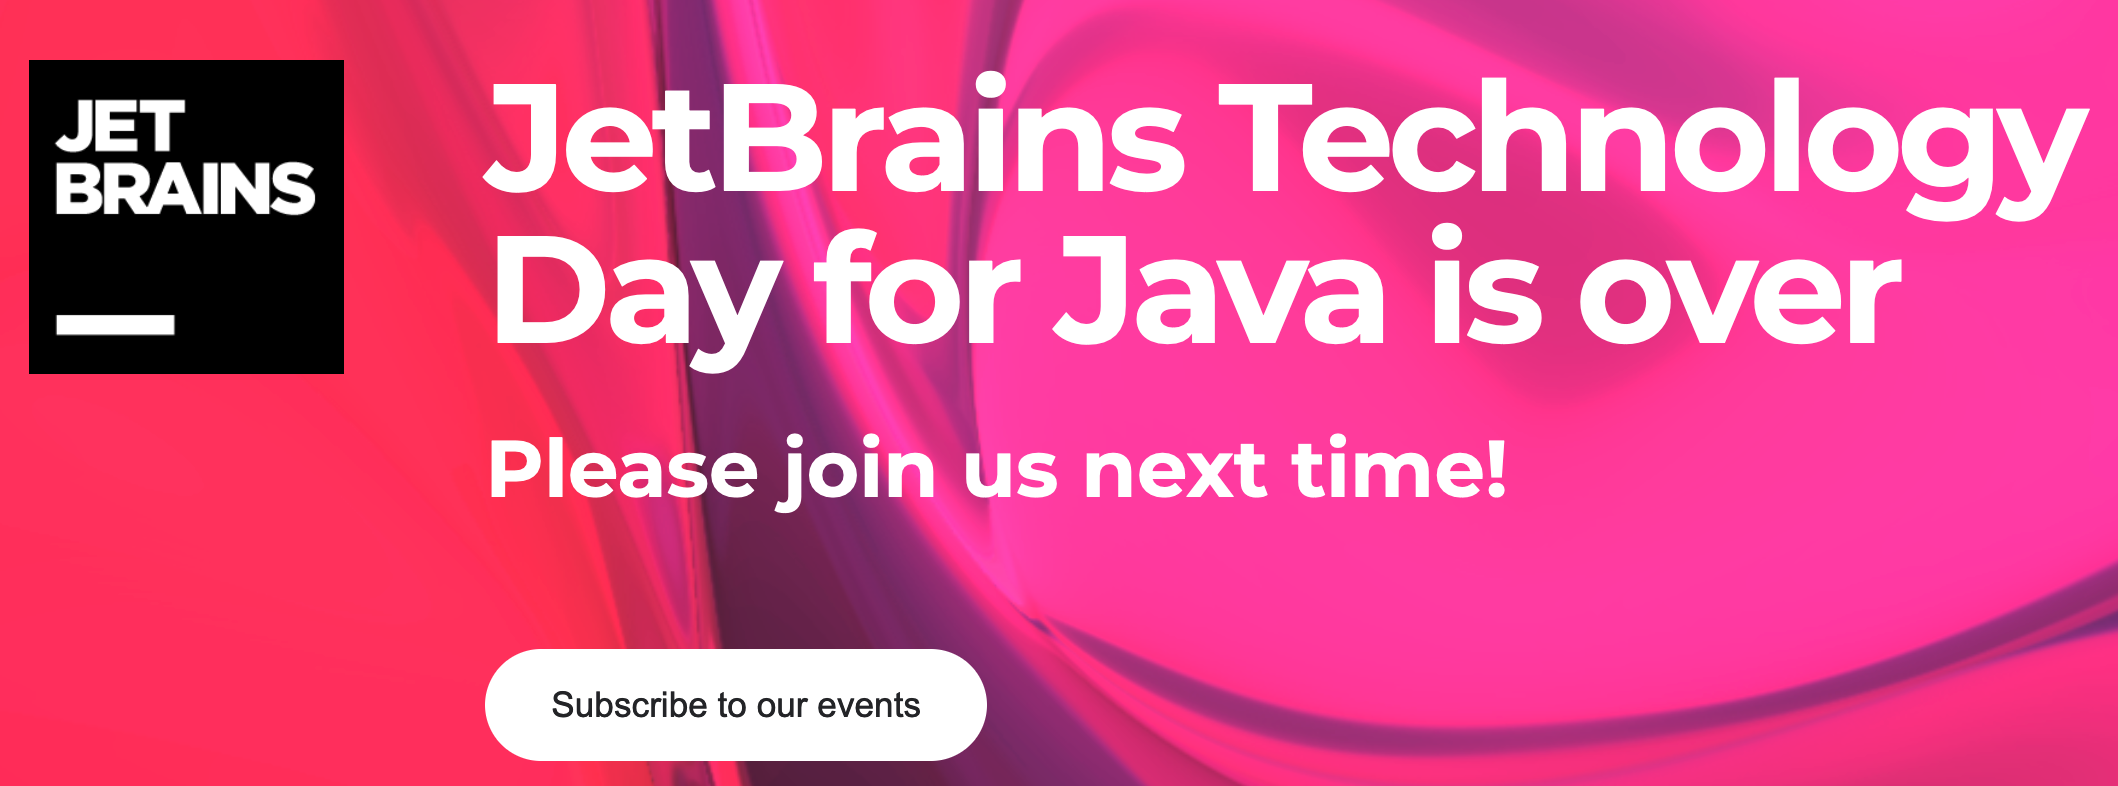 JetBrains Technology Day for Java